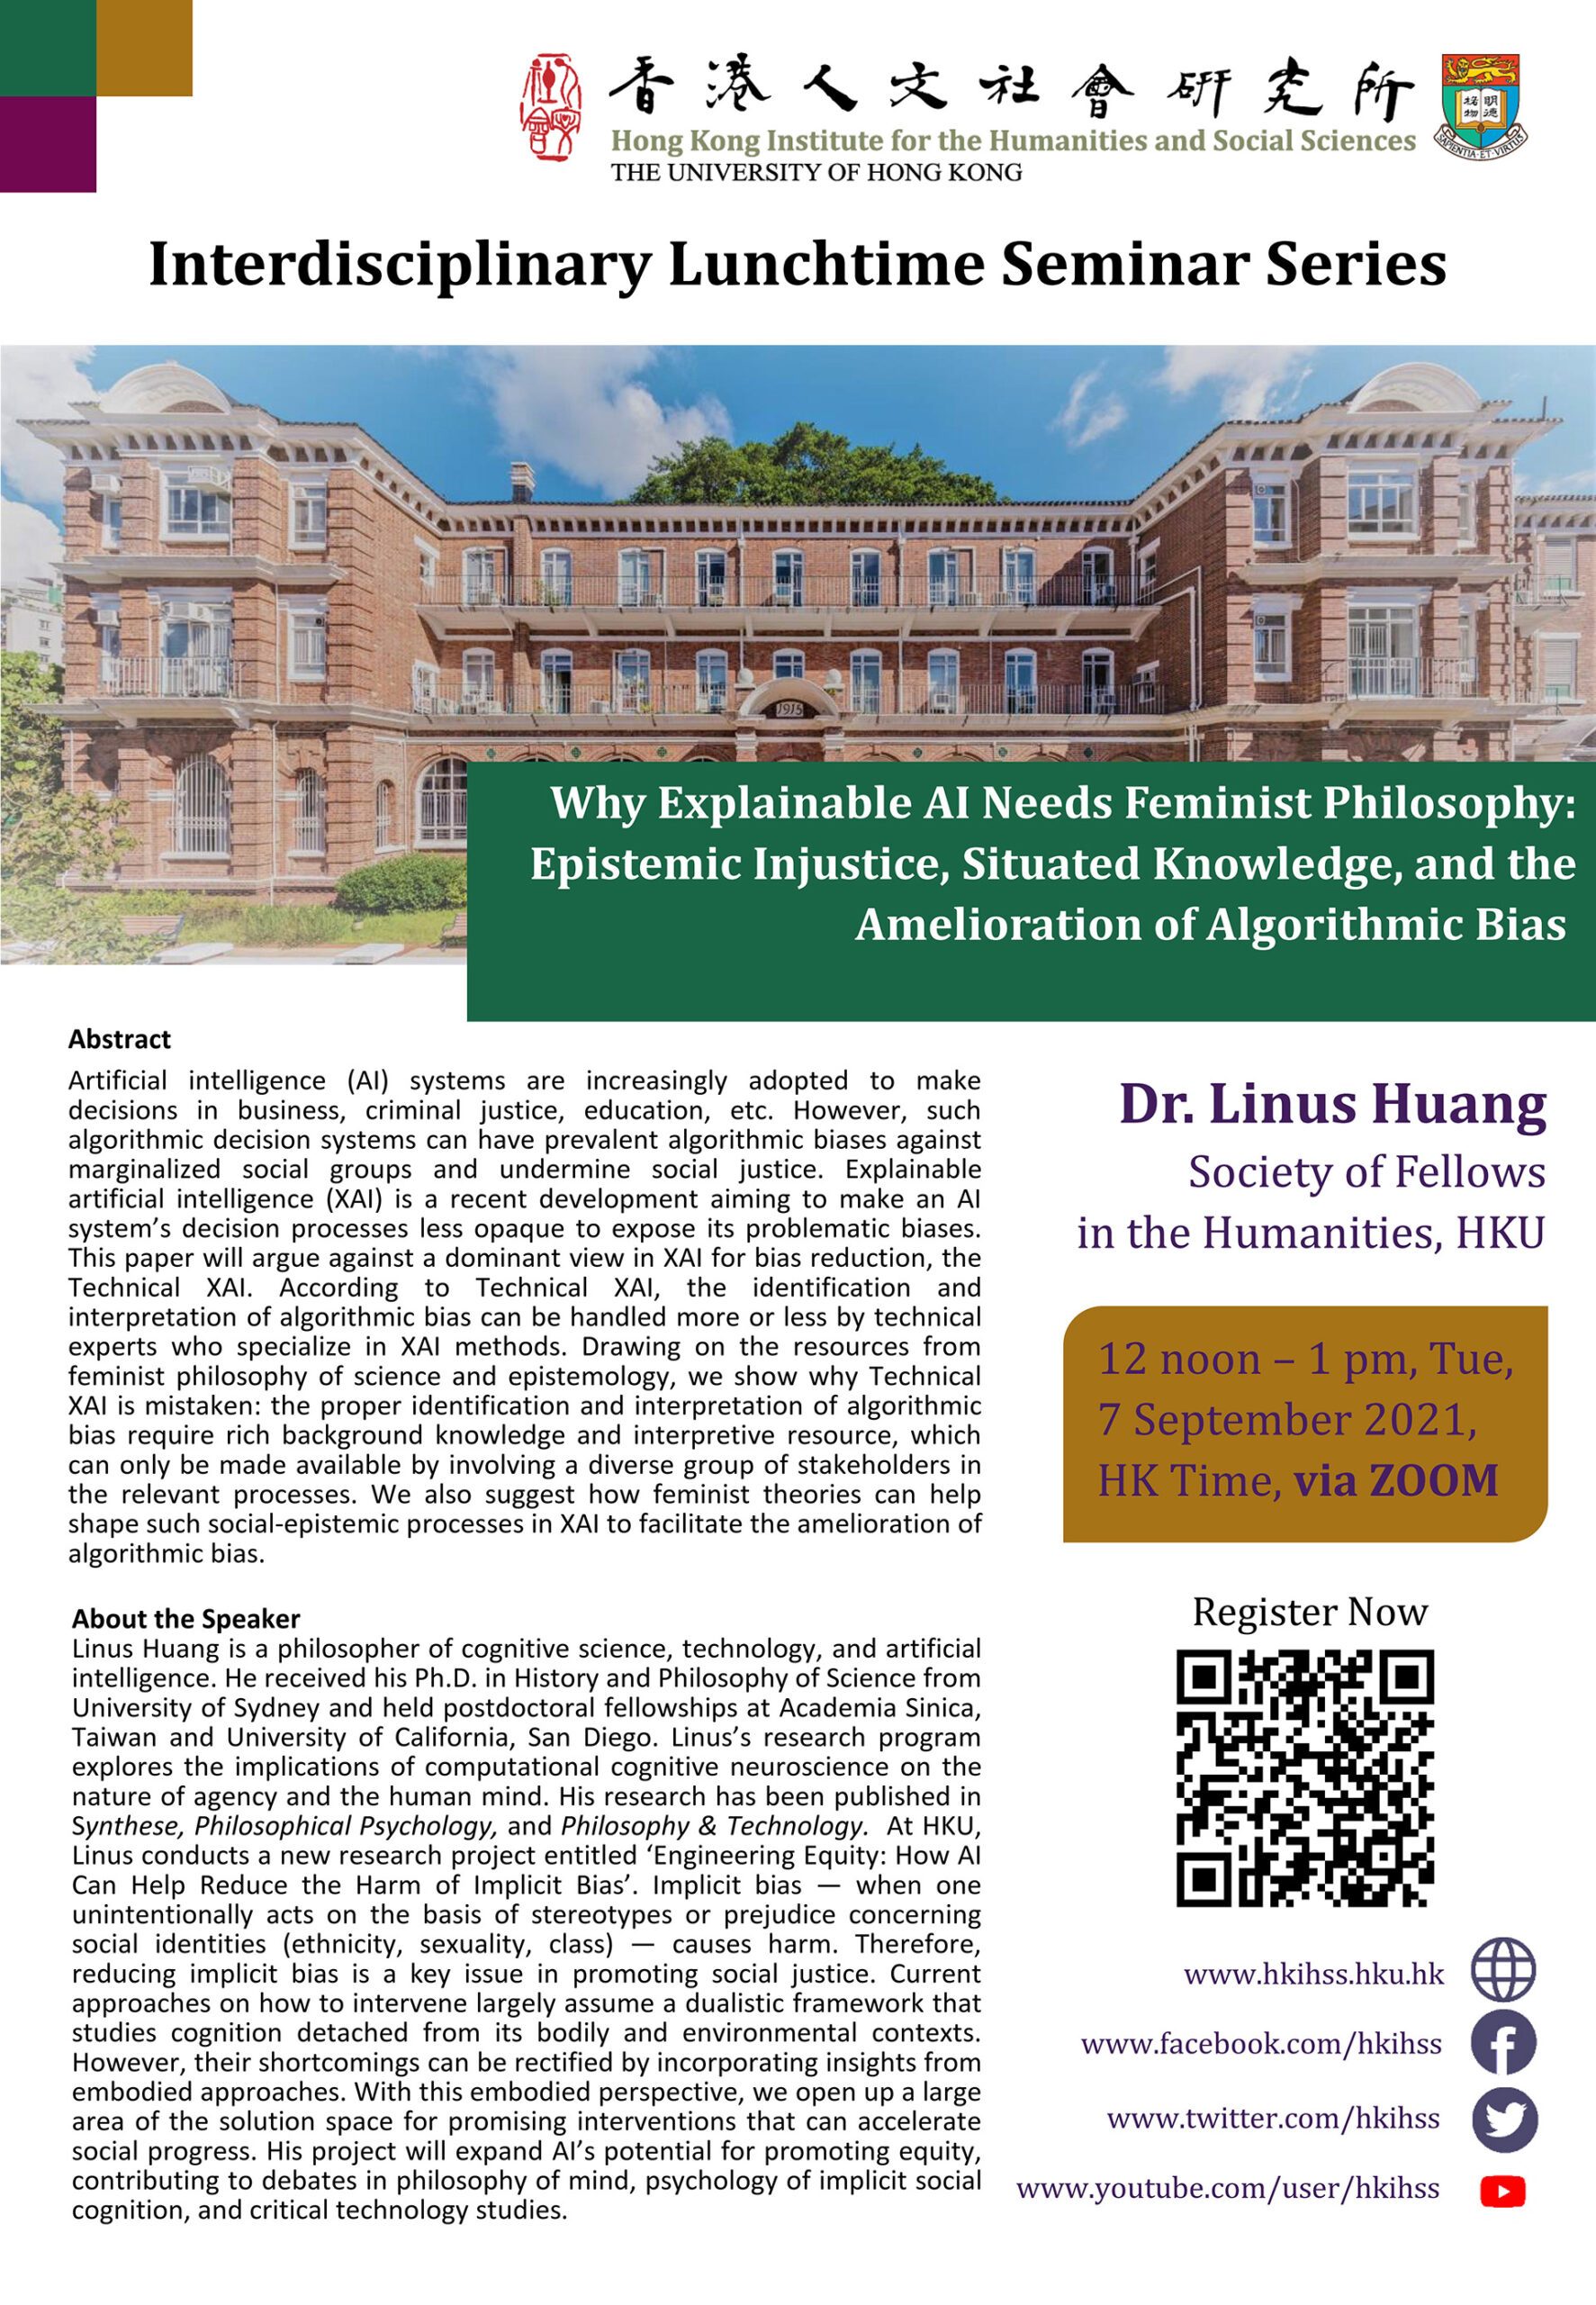 Interdisciplinary Lunchtime Seminar on “Why Explainable AI Needs Feminist Philosophy: Epistemic Injustice, Situated Knowledge, and the Amelioration of Algorithmic Bias” by Dr. Linus Huang (September 7, 2021)